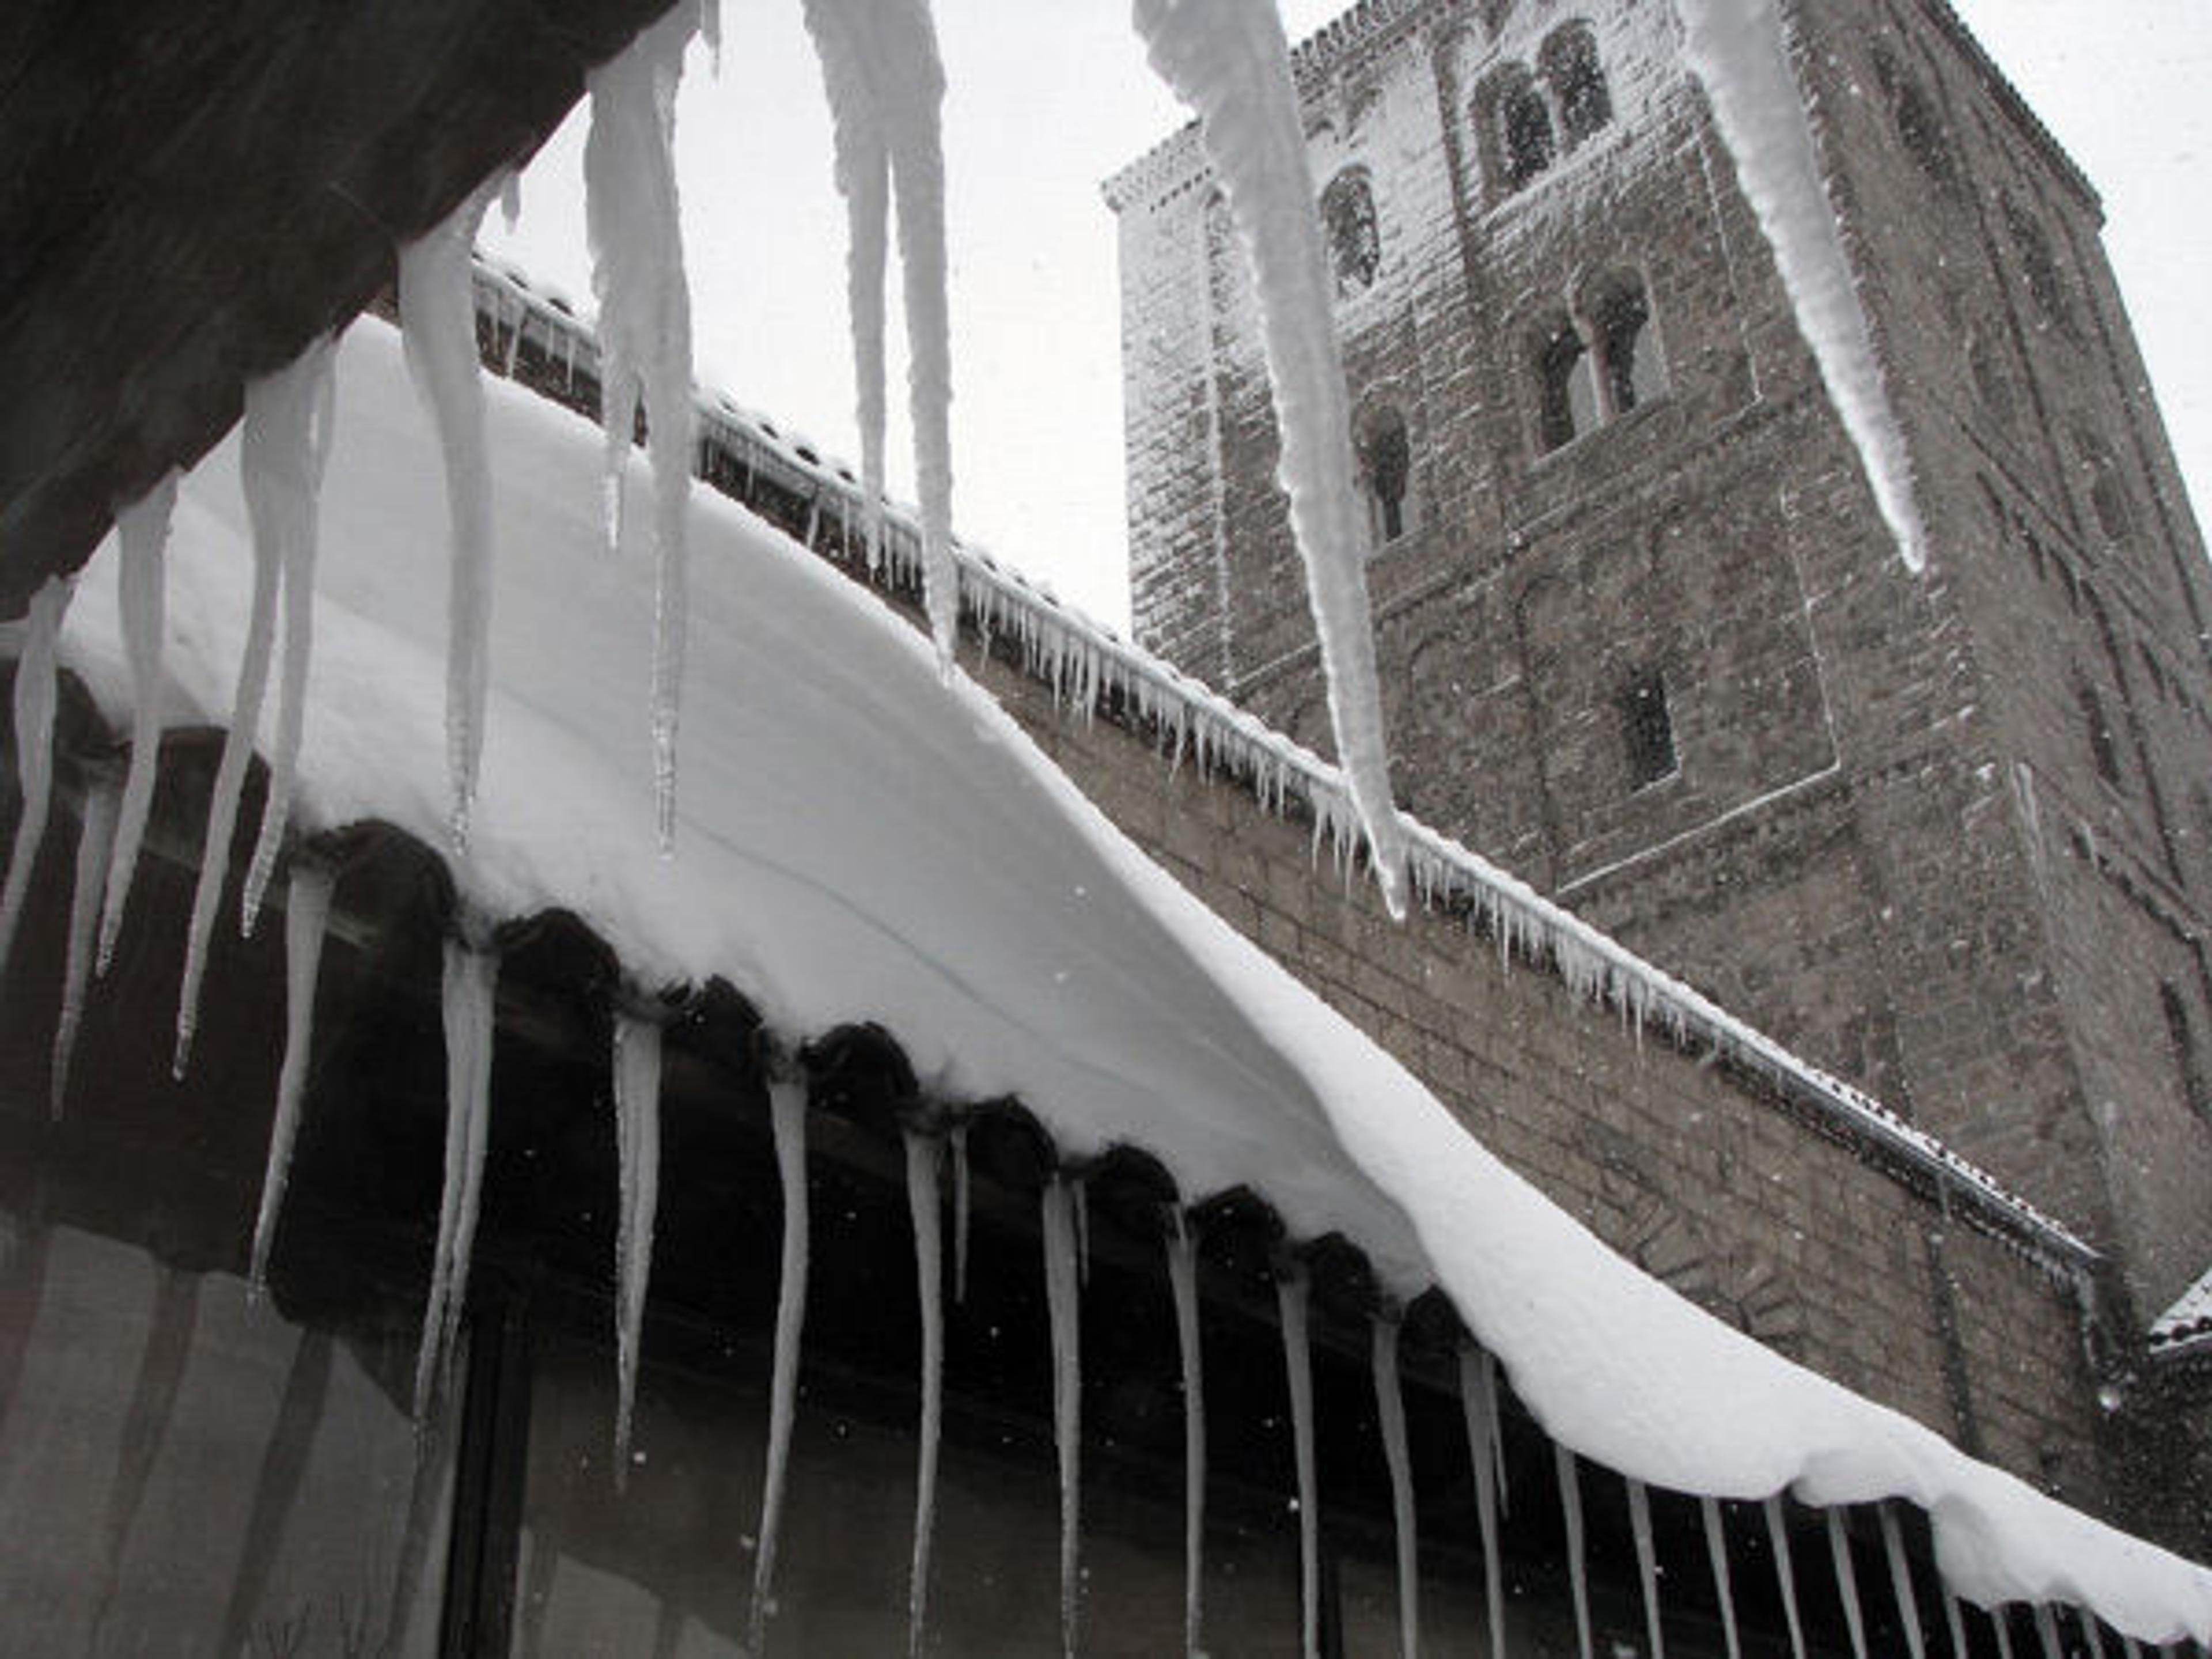 Snow-dusted icicles in the Cuxa Cloister